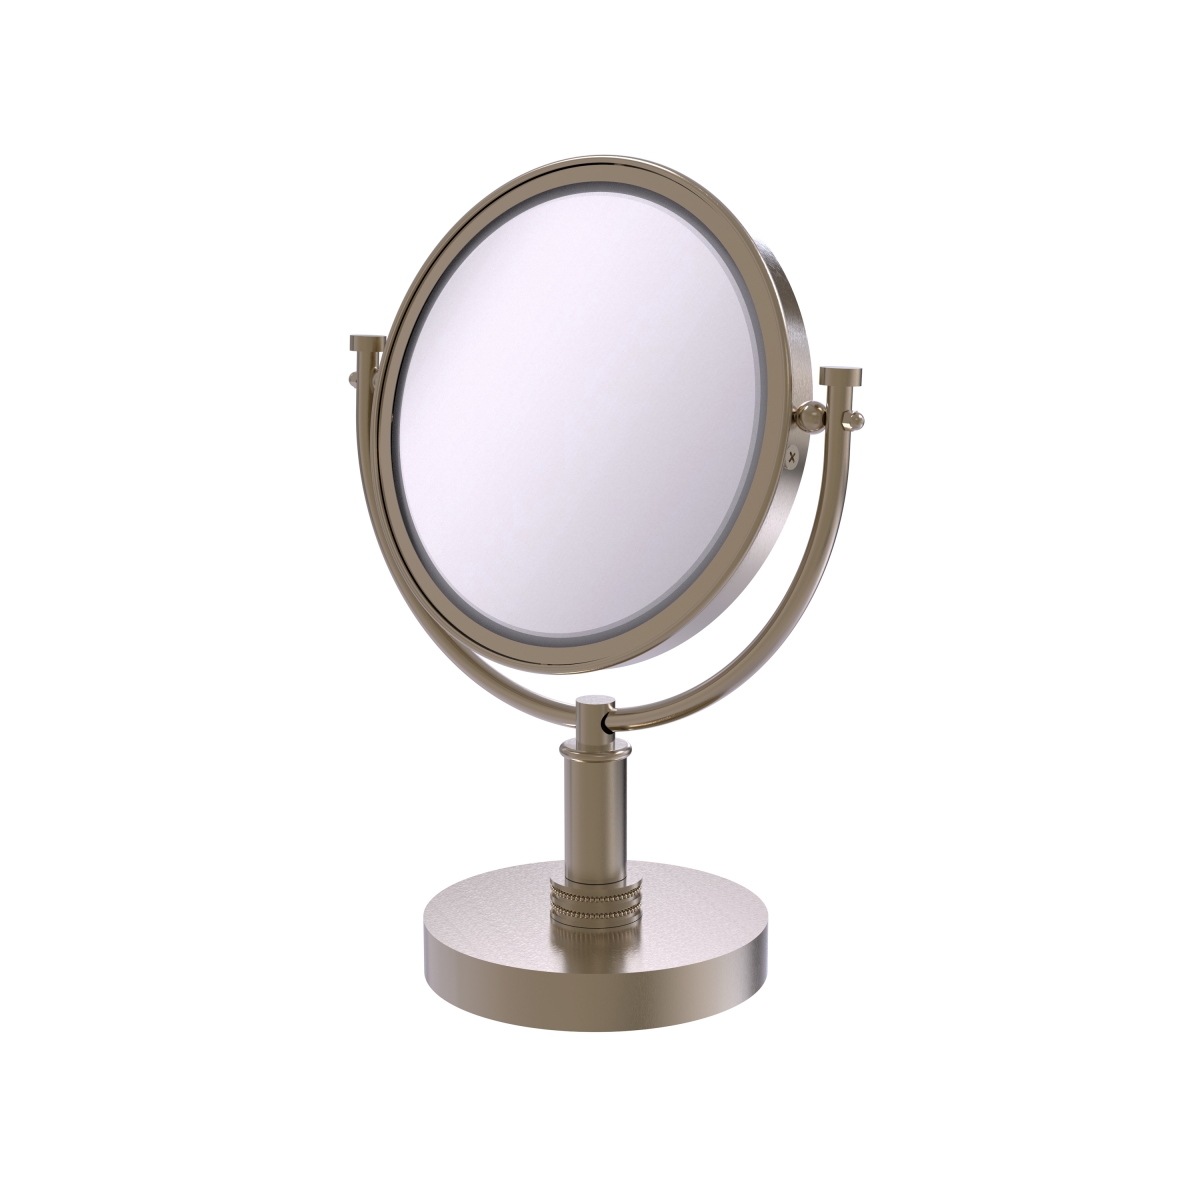 Picture of Allied Brass DM-4D-5X-PEW 8 in. Vanity Top Make-Up Mirror 5X Magnification, Antique Pewter - 15 x 8 x 8 in.